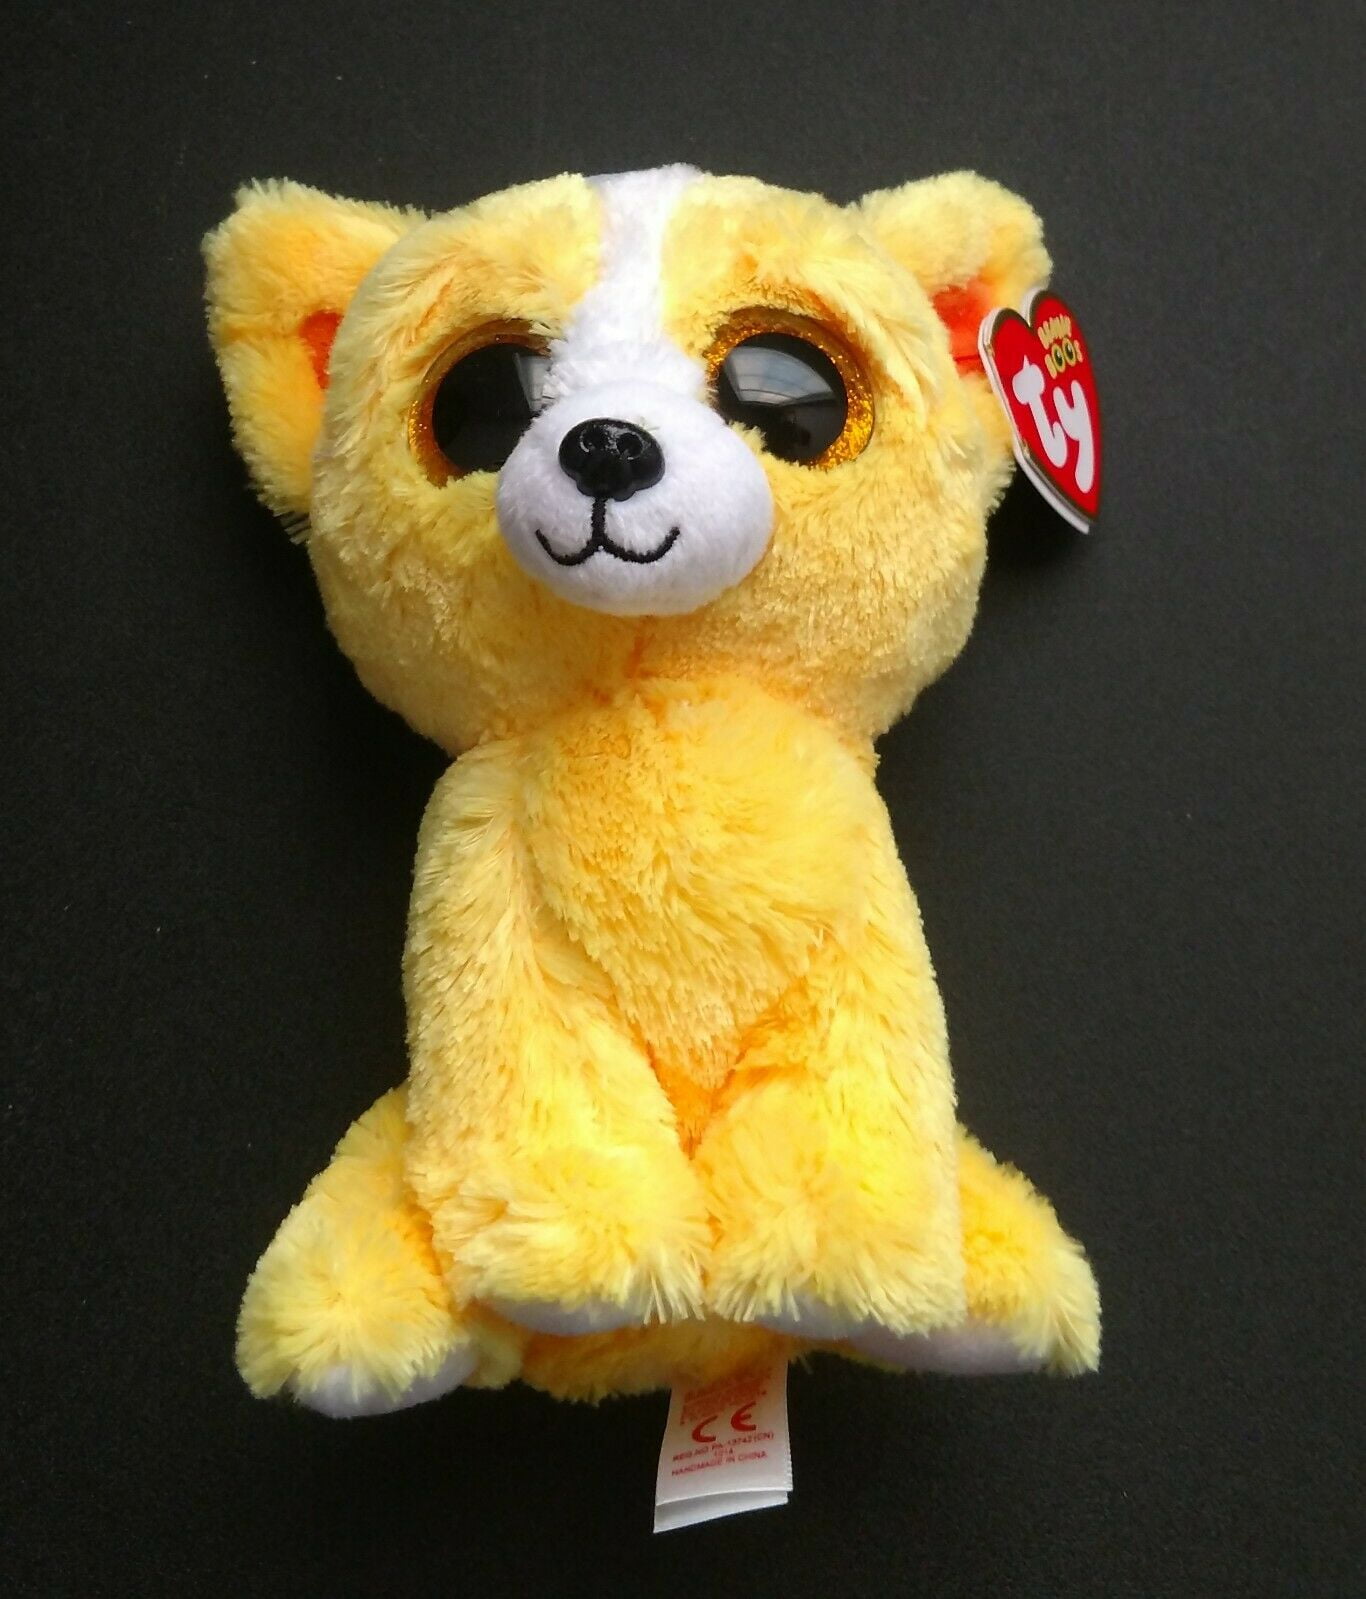 TY Beanie Boos - Dandelion The Yellow Dog Special Edition  (Glitter Eyes) Small 6" Plush